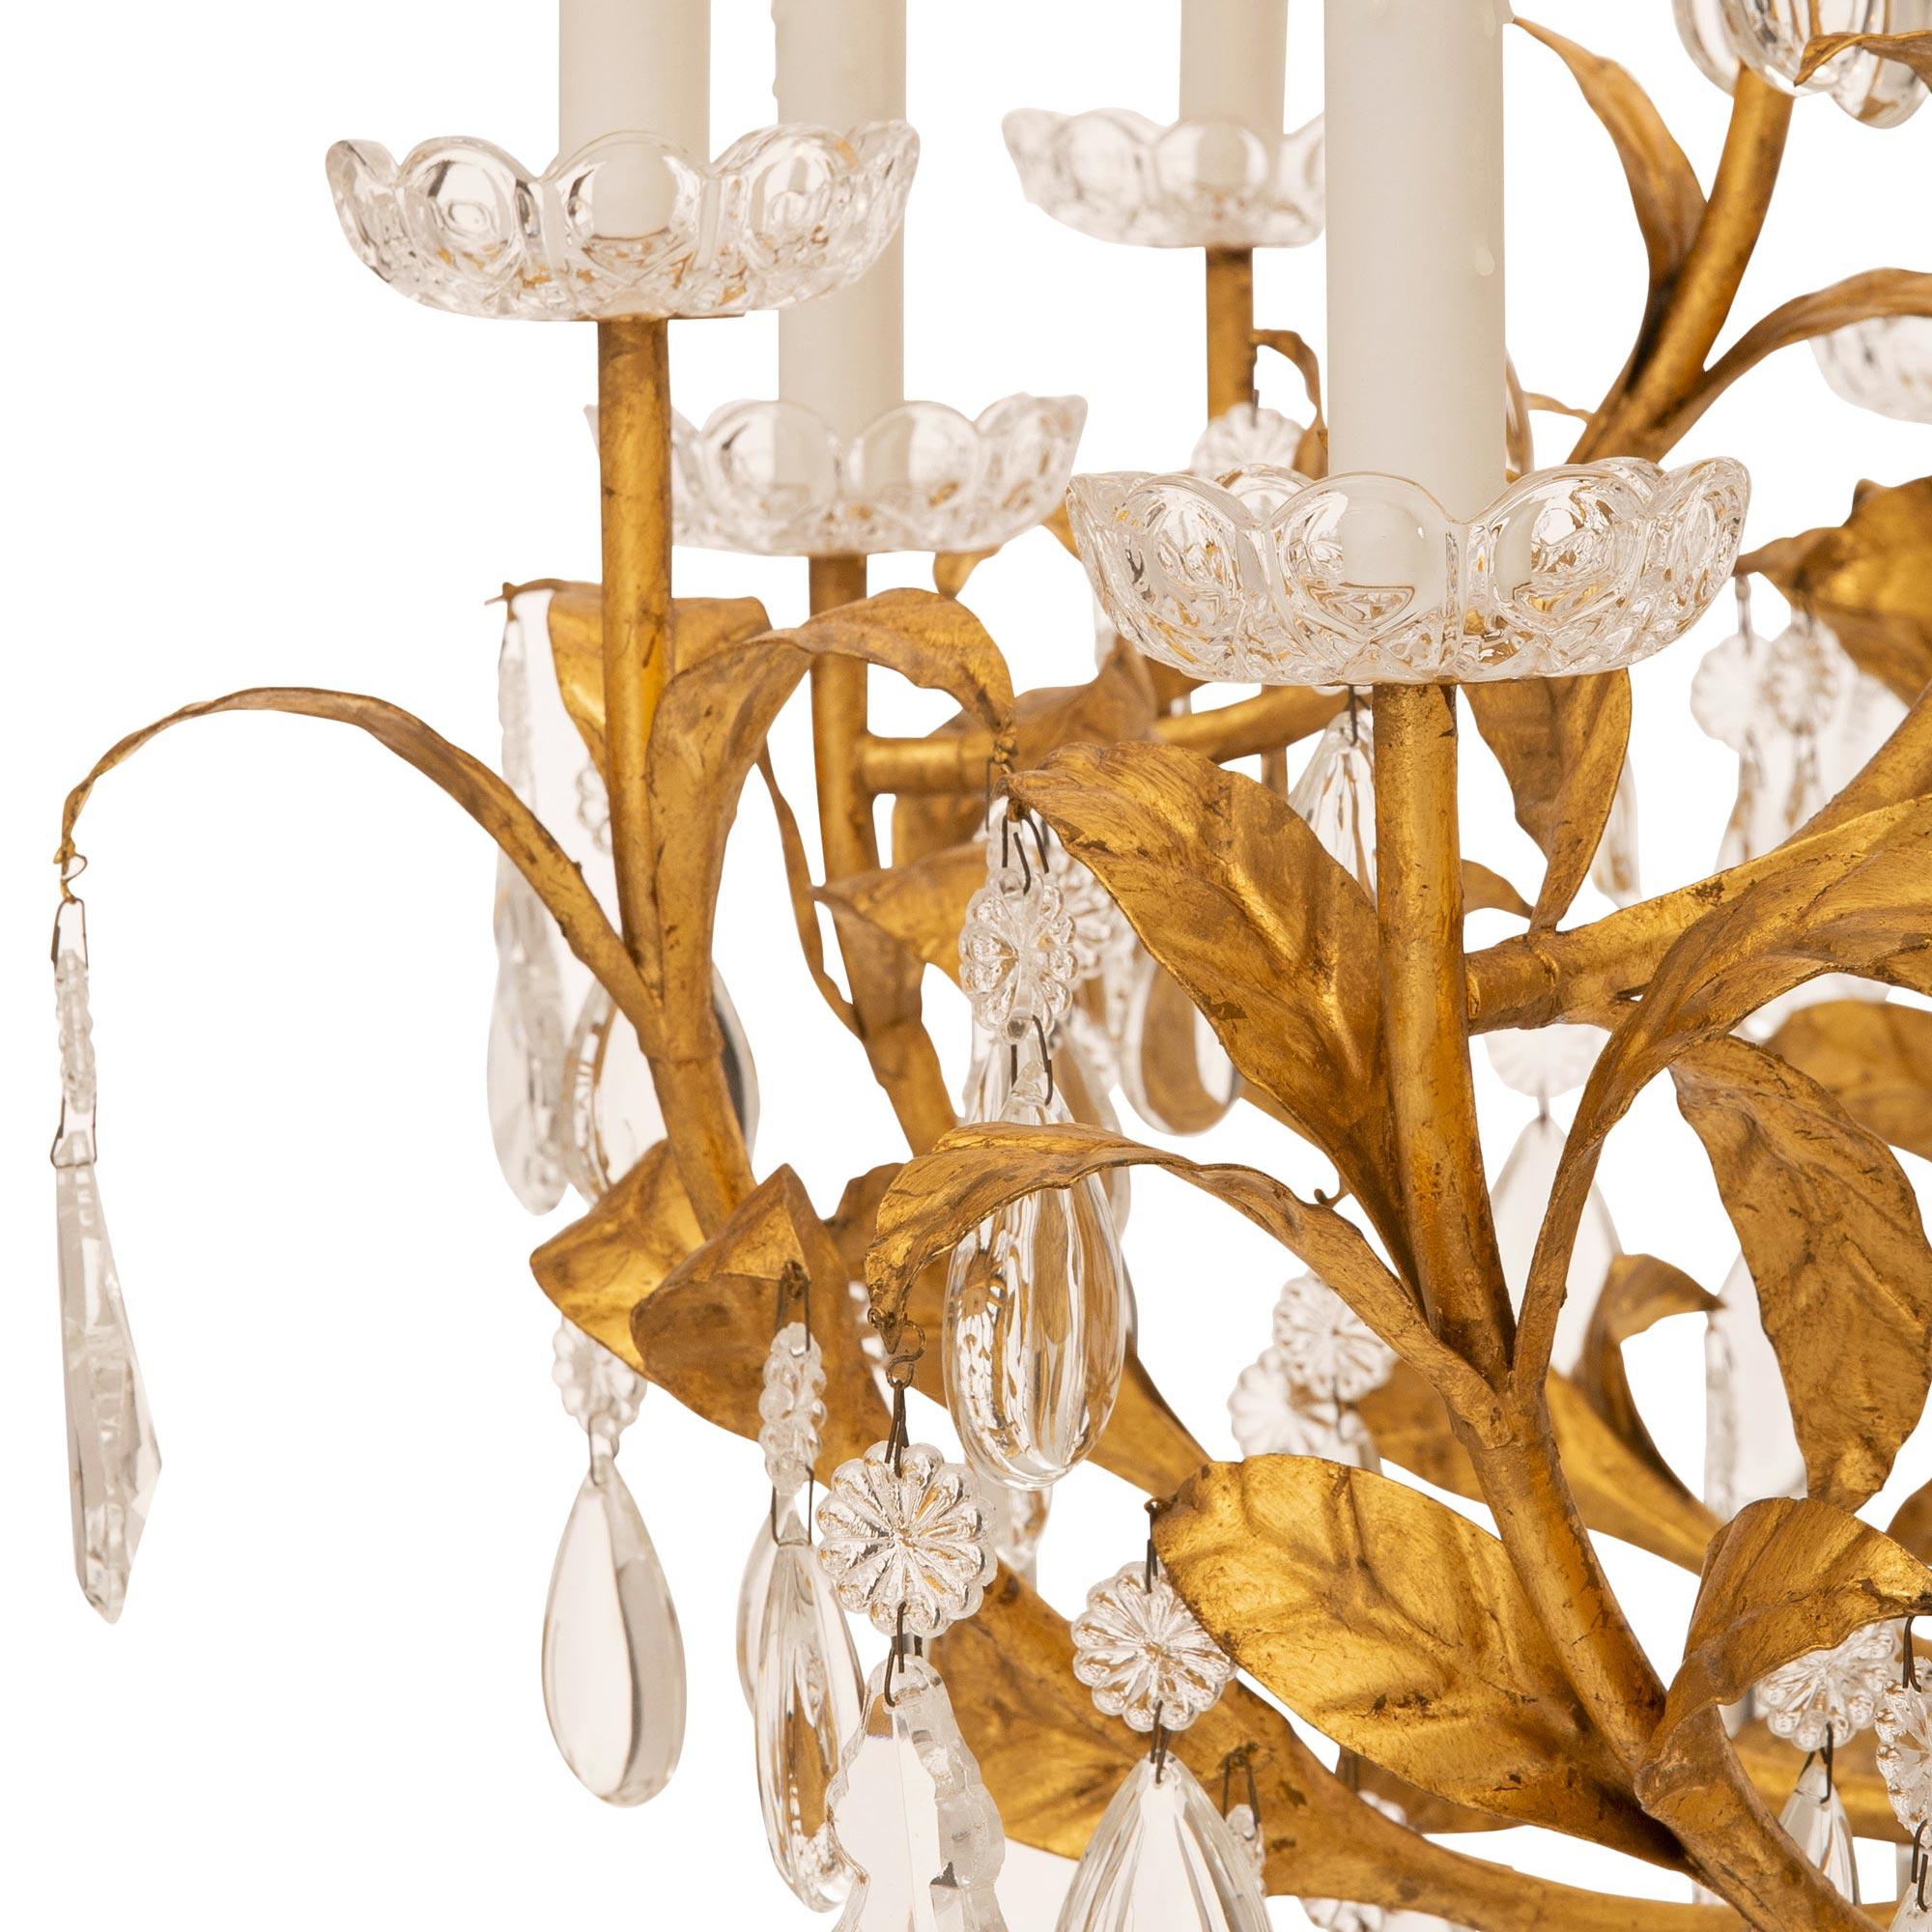  Pair of Italian turn of the cent Louis XV st. gilt metal and cryst chandeliers For Sale 1